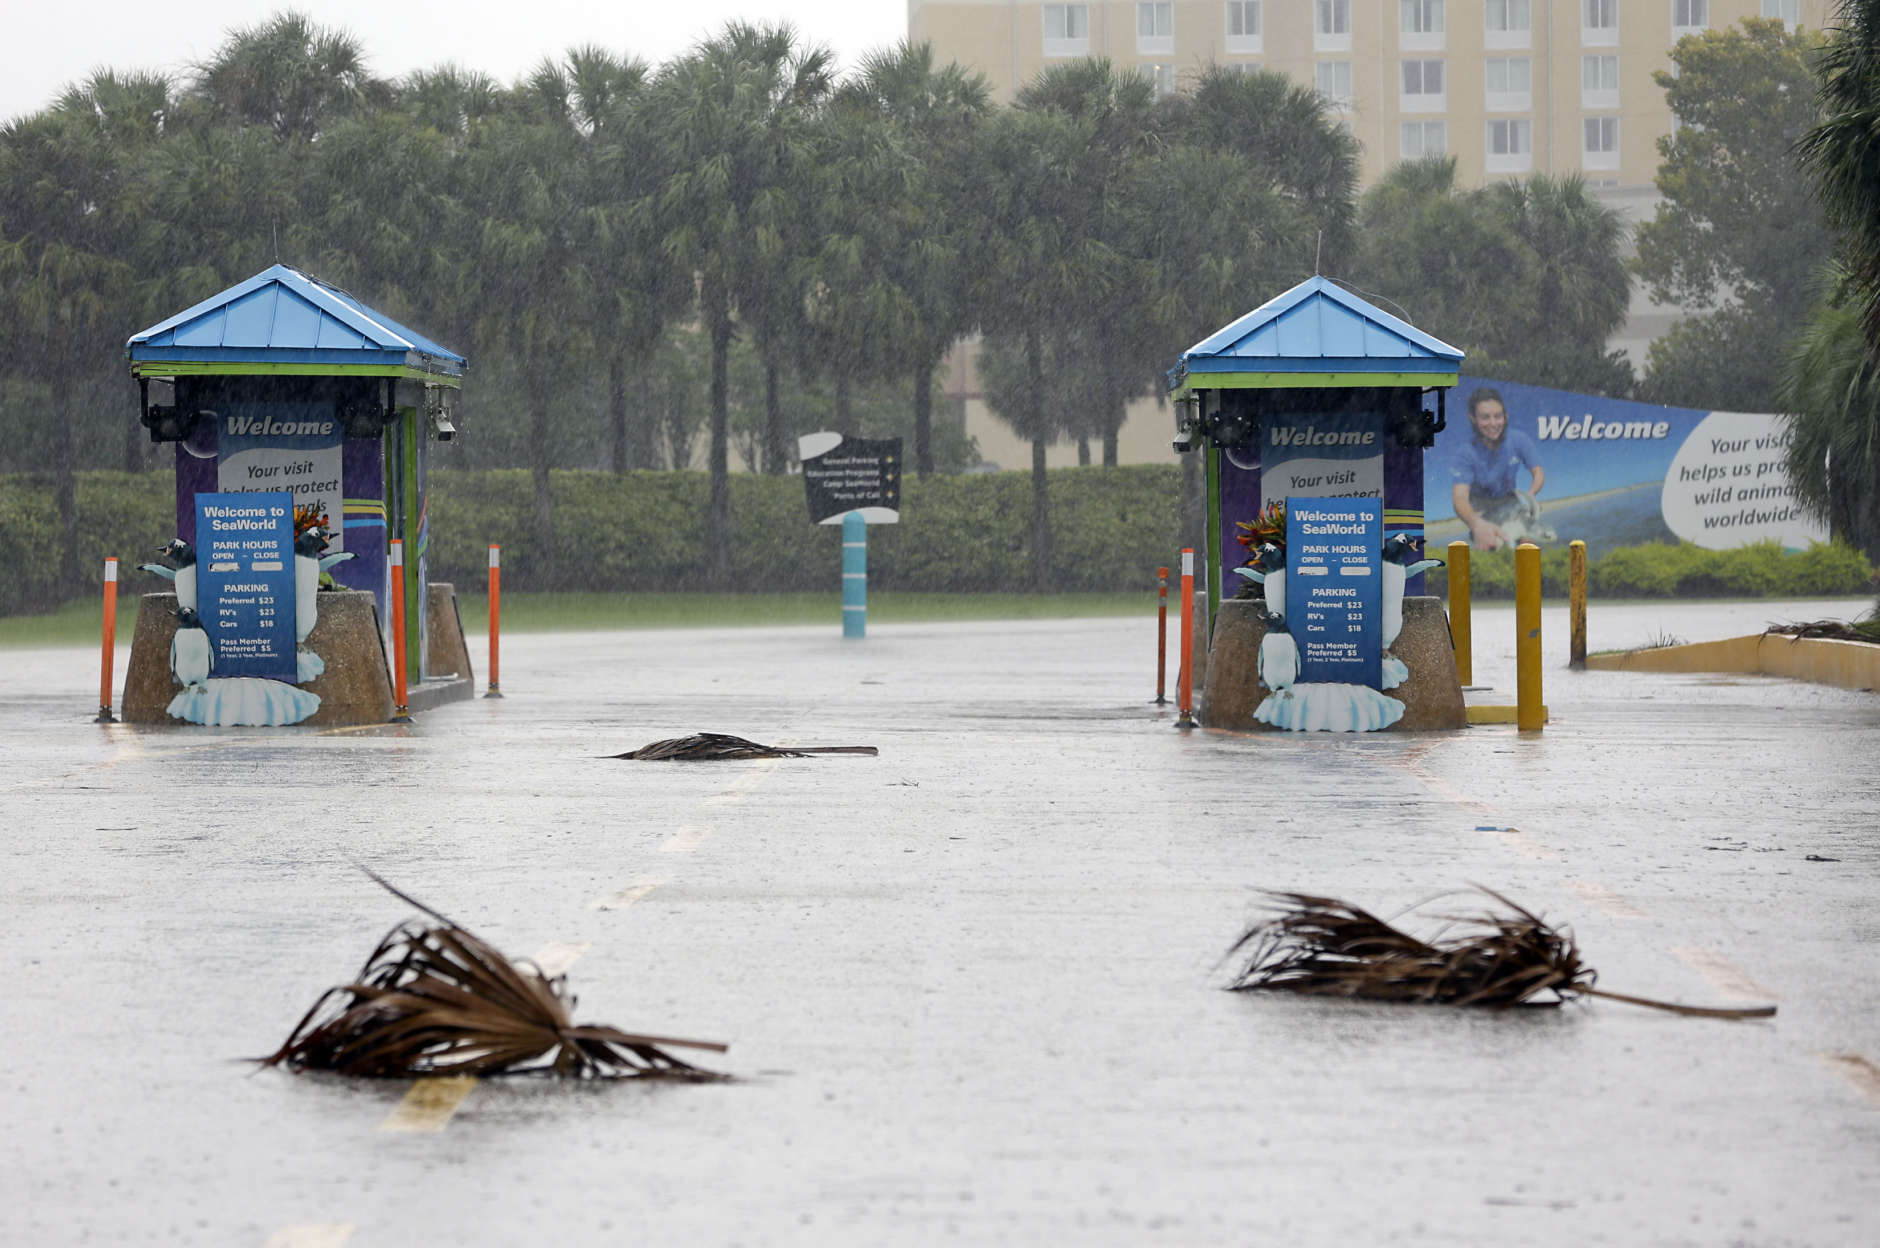 The entrance to the Sea World of Orlando is closed because of Hurricane Irma, Sunday, Sept. 10, 2017, in Orlando, Fla. Other tourists attractions including Universal Studios and Disney World were also closed and planned to reopen Tuesday. (AP Photo/John Raoux)